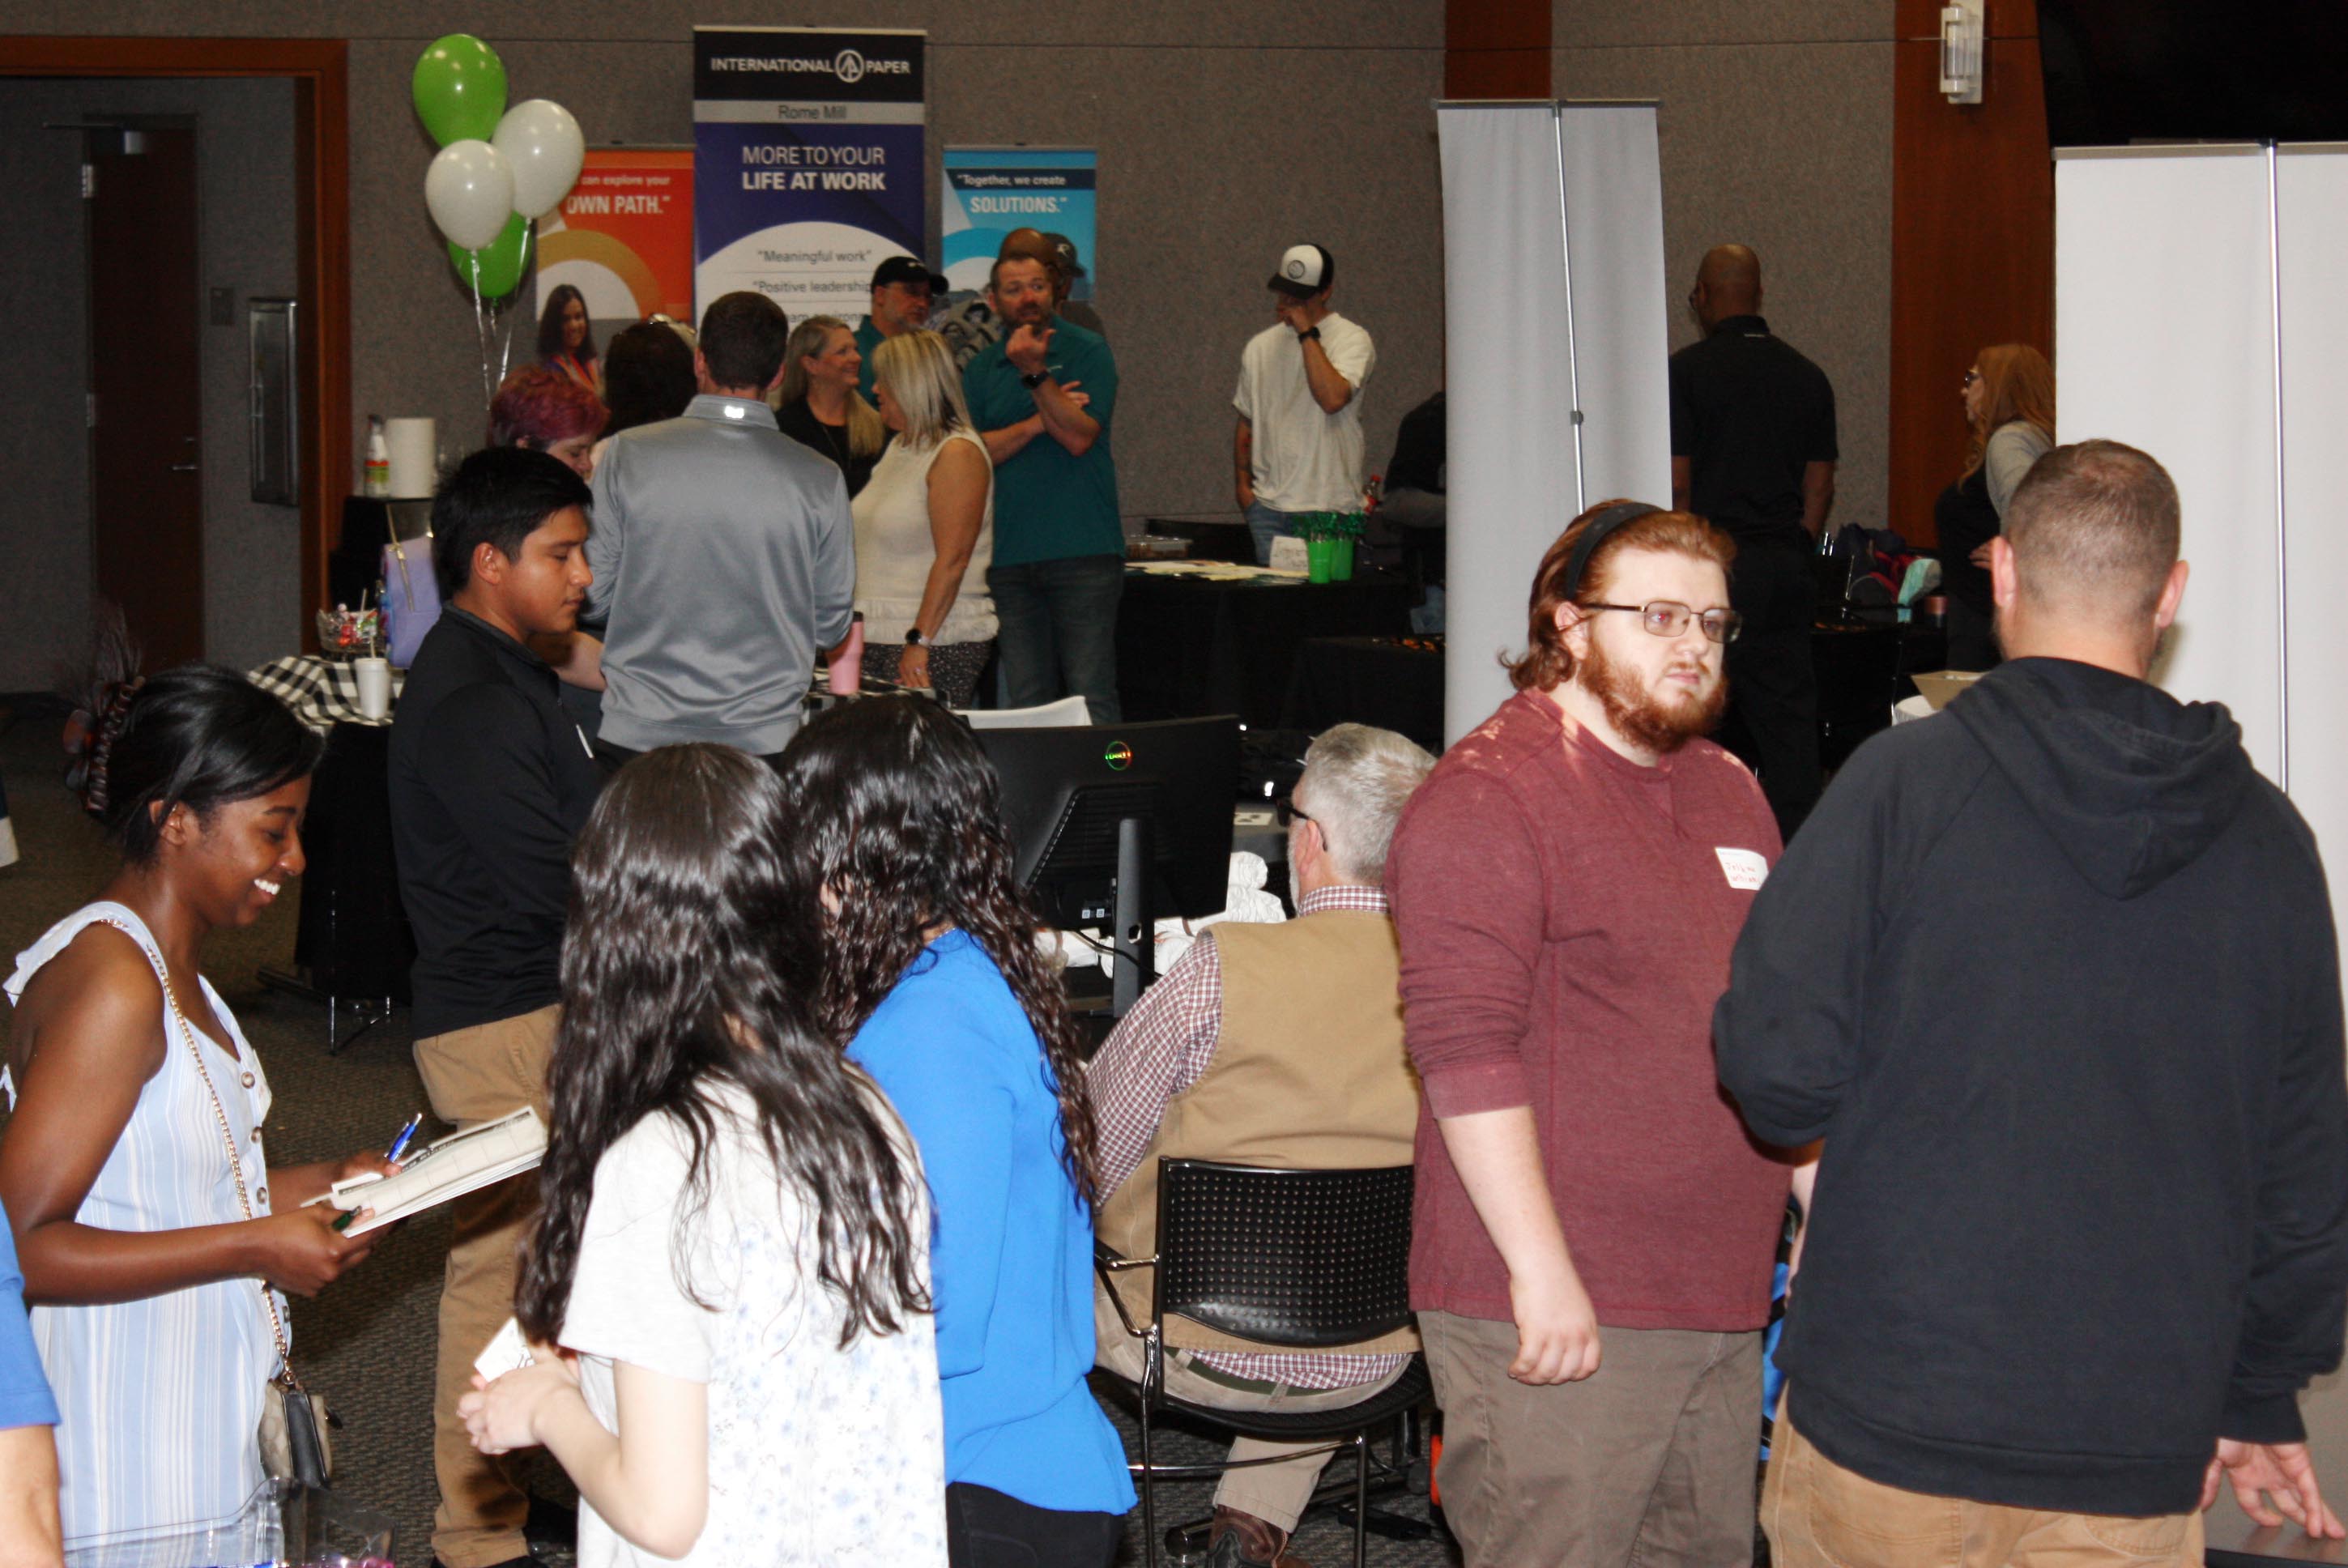 Students learn about career opportunities at the GNTC Career Fair on Tuesday, April 11.